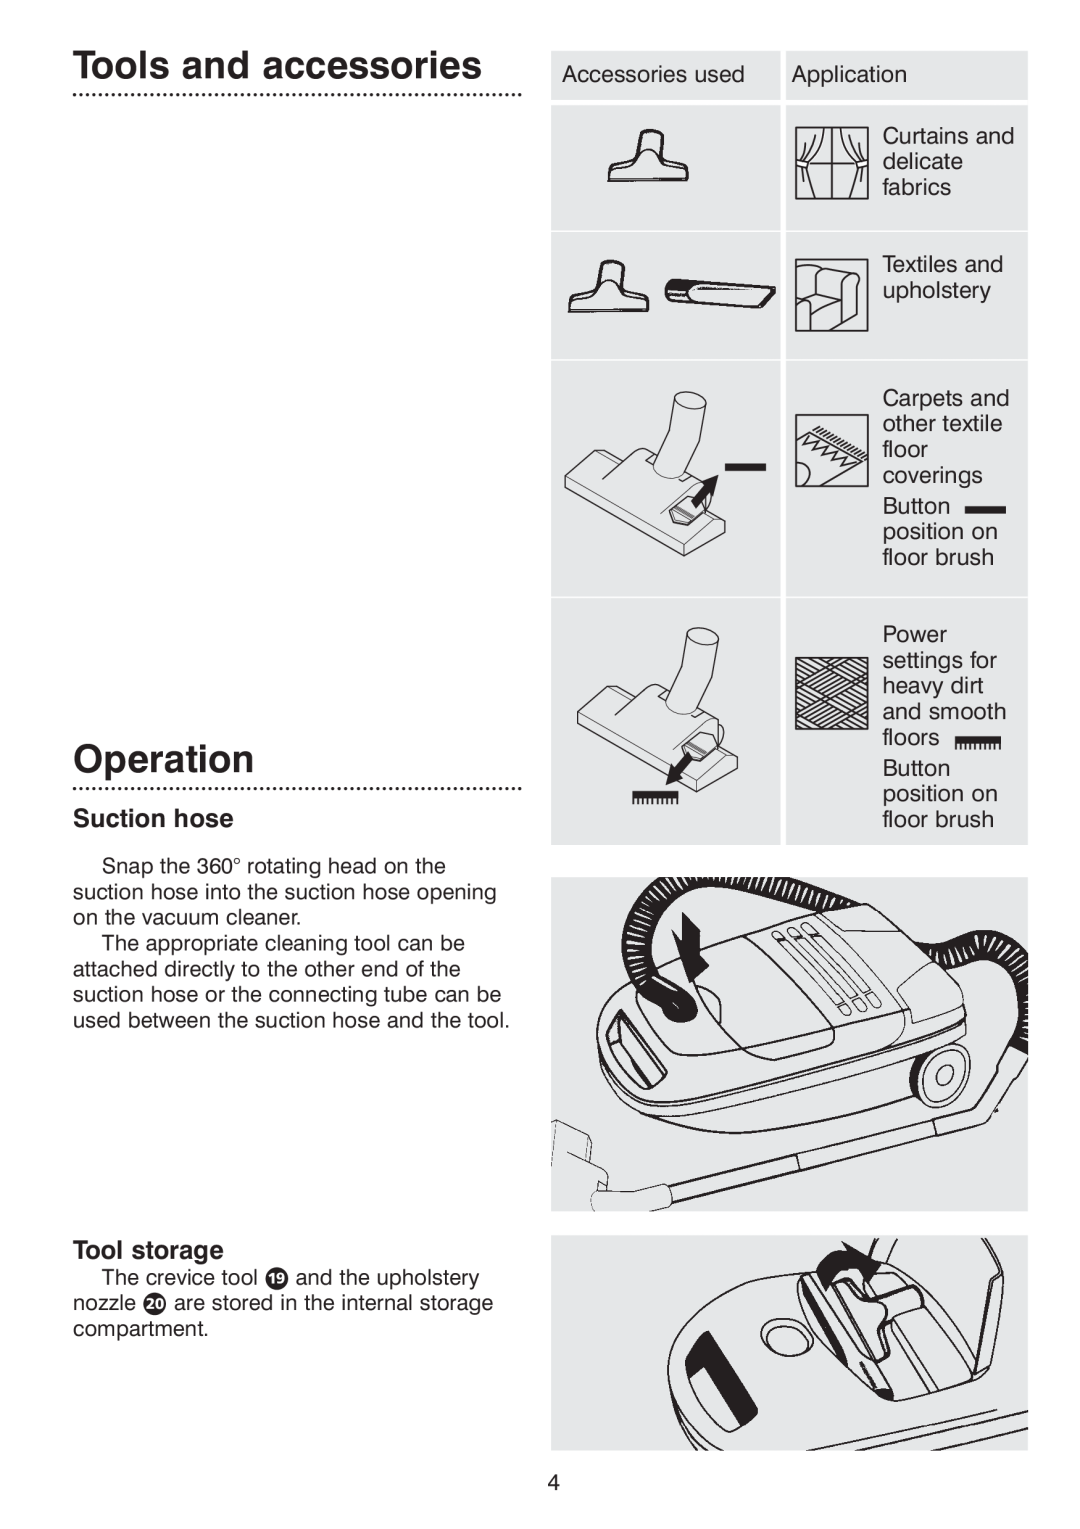 Morphy Richards Ecovac 70096 Rev 2 (Page 1) manual Tools and accessories, Operation, Suction hose, Tool storage 